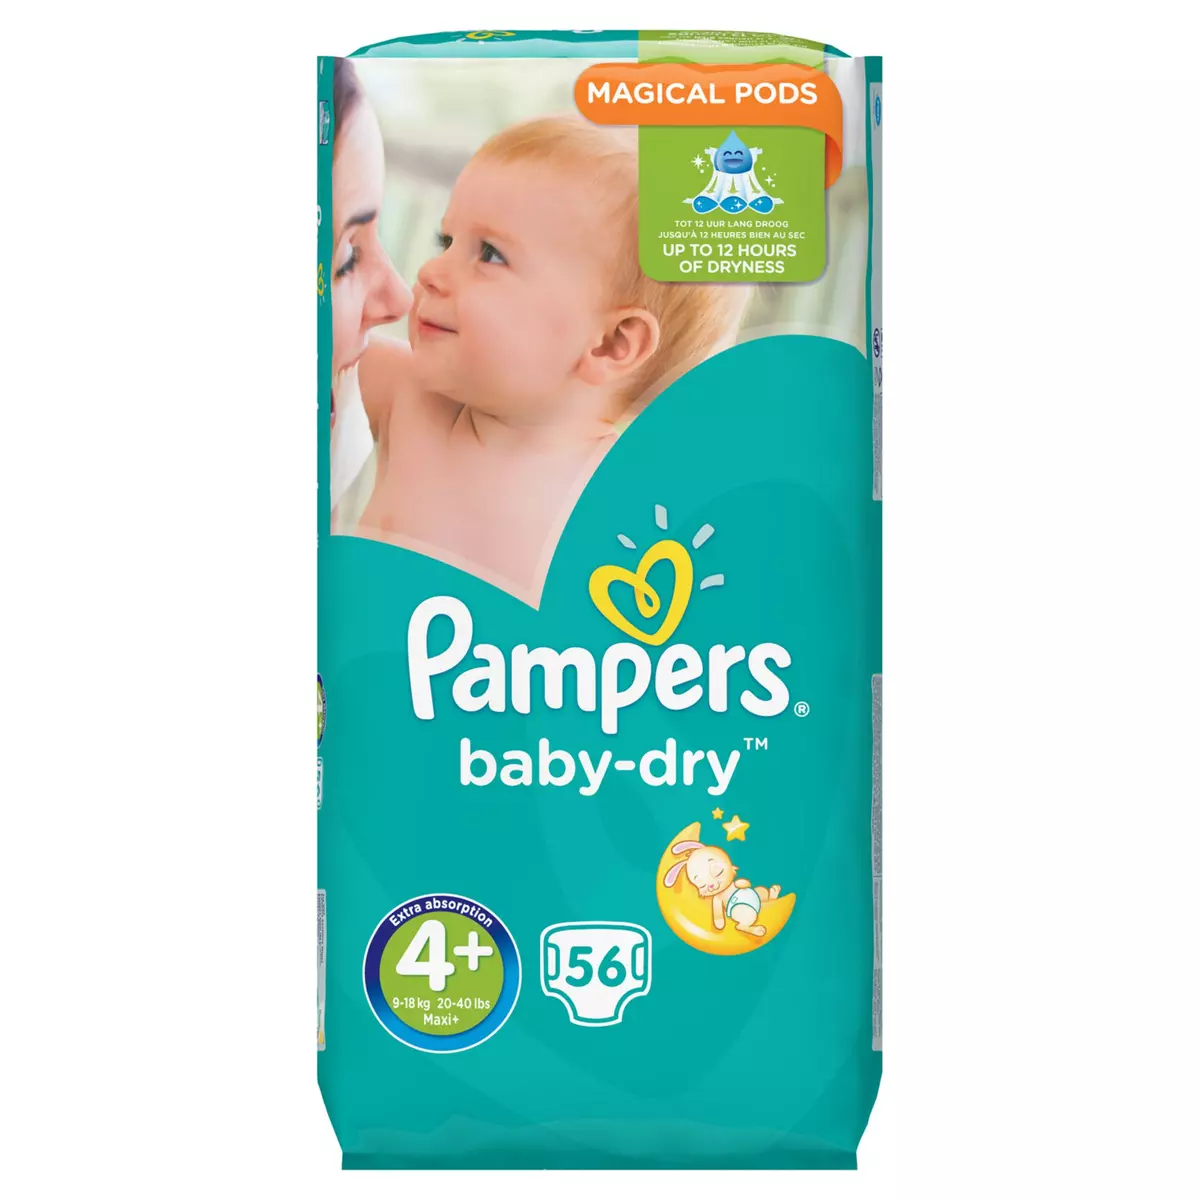 PAMPERS Pampers Baby-dry couches taille 4+ (9-18 kg) x56 56 couches